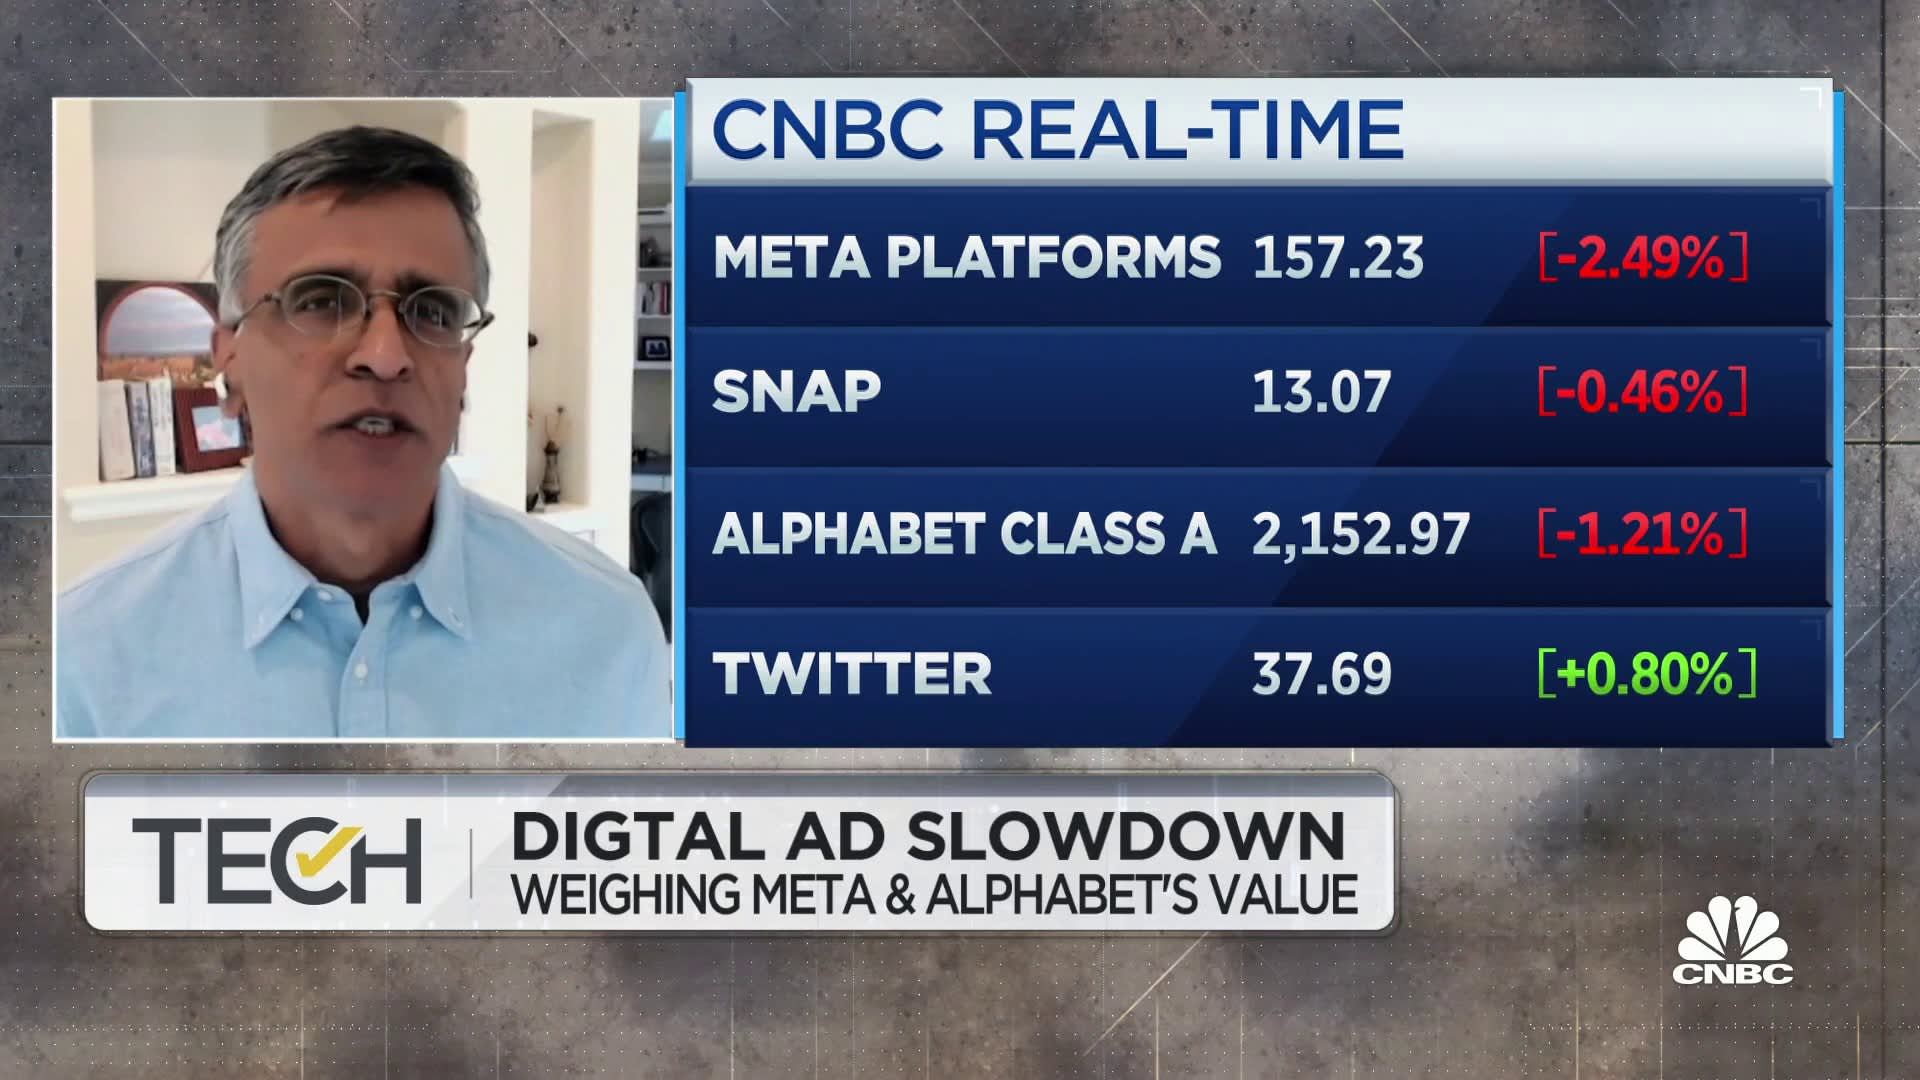 Advertising platforms' stock crashed with the recession looming